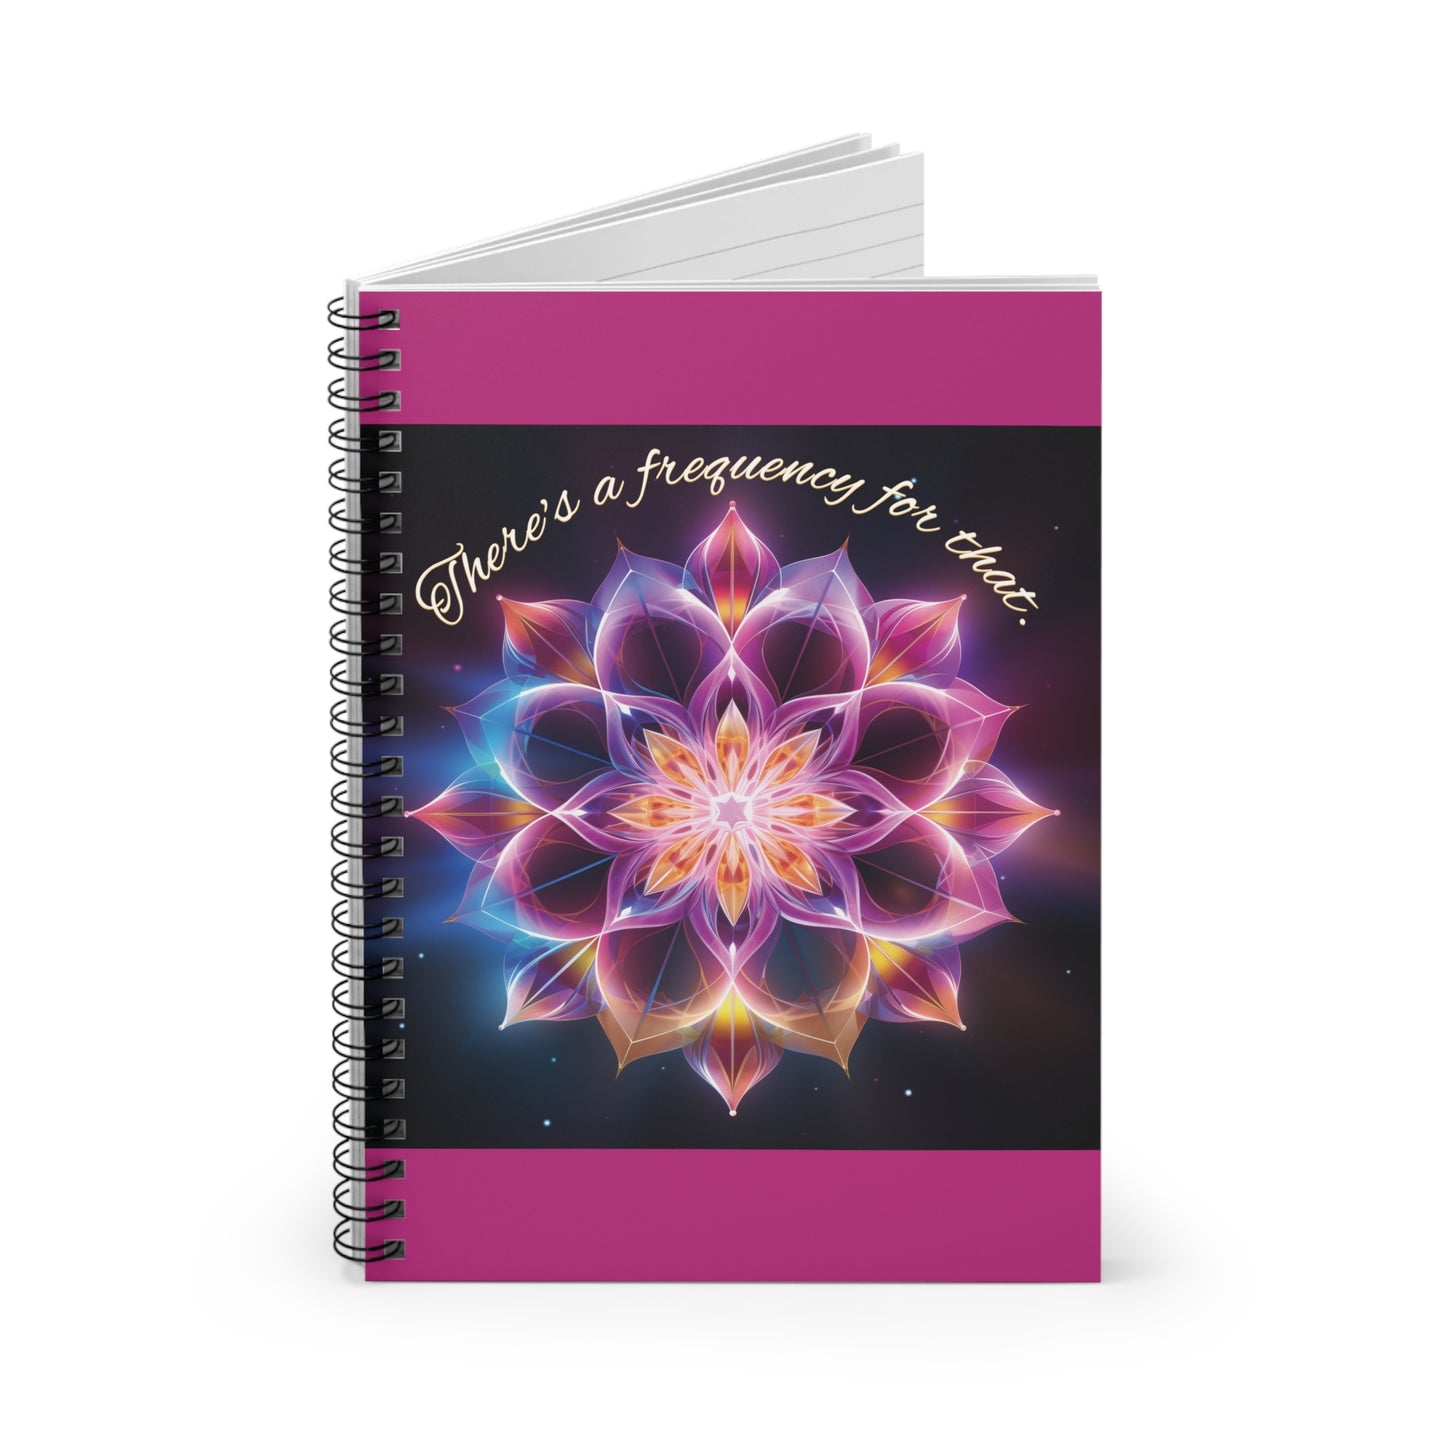 Healing Waves Frequency Spiral Notebook - Ruled Line - Pink